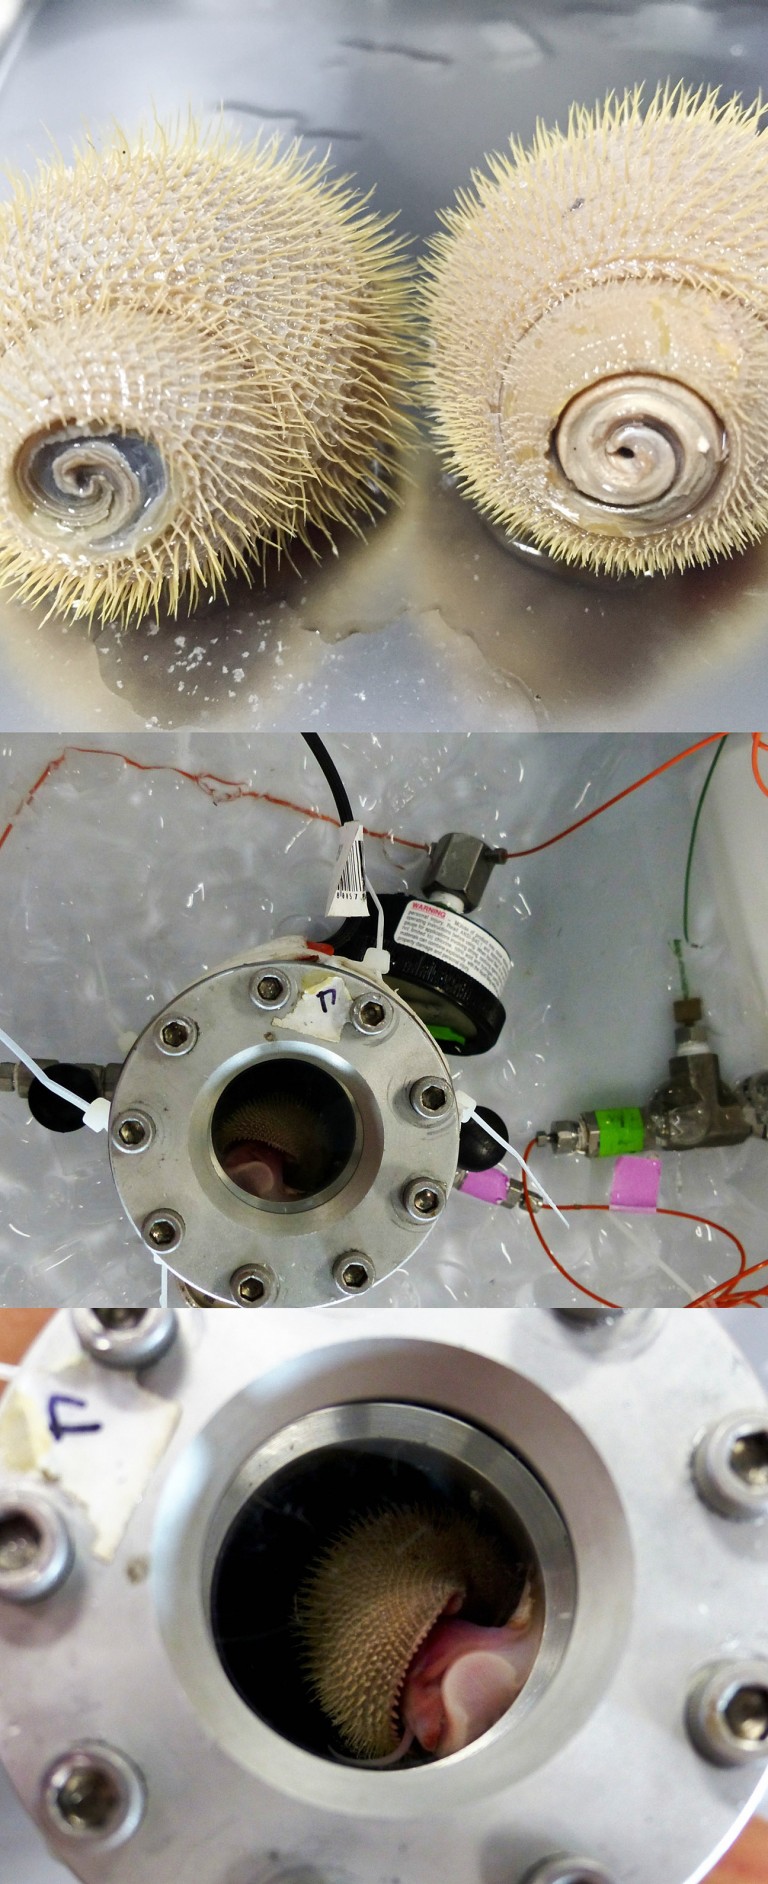 A collected vent animal (Alviniconcha snail) and the pressurized vessel used to mimic its deep-sea homes.